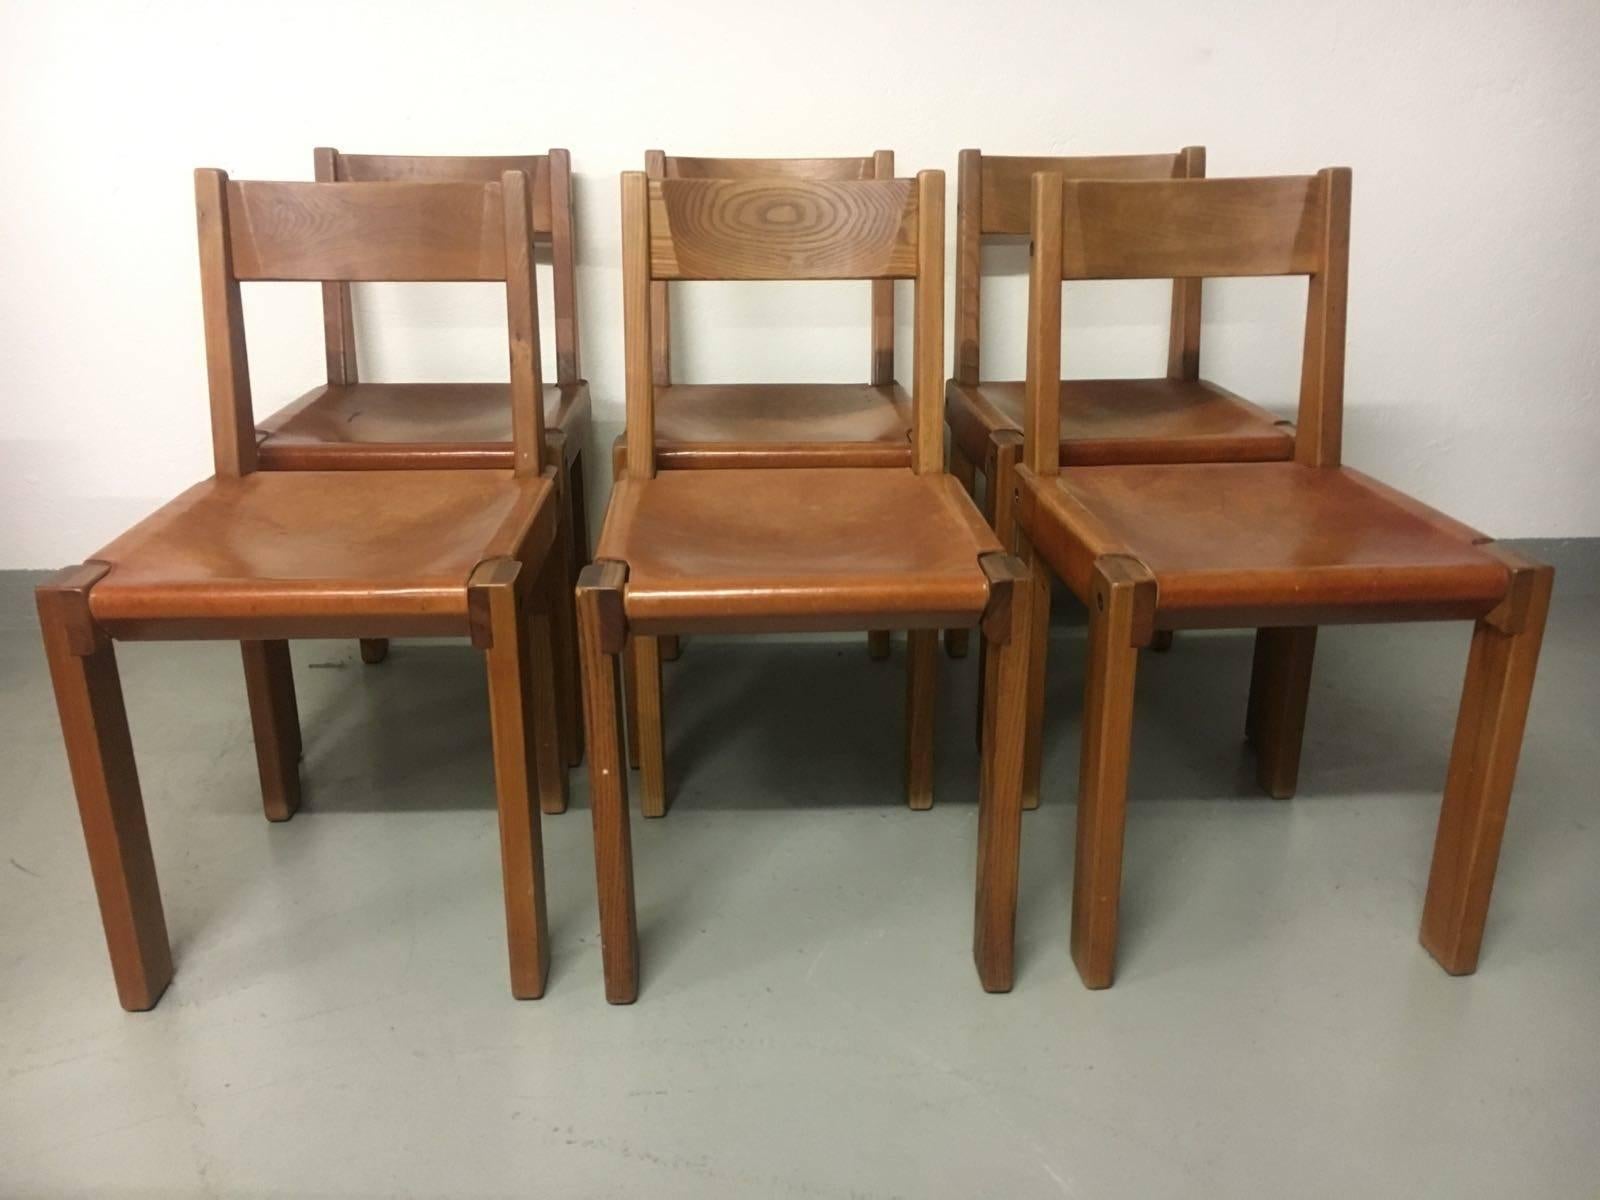 Set of six leather and solid elm dining chairs by Pierre Chapo, France, circa 1970.
Nice patina, one chair has black stains on leather seat (pic.7)
cognac leather
Model 